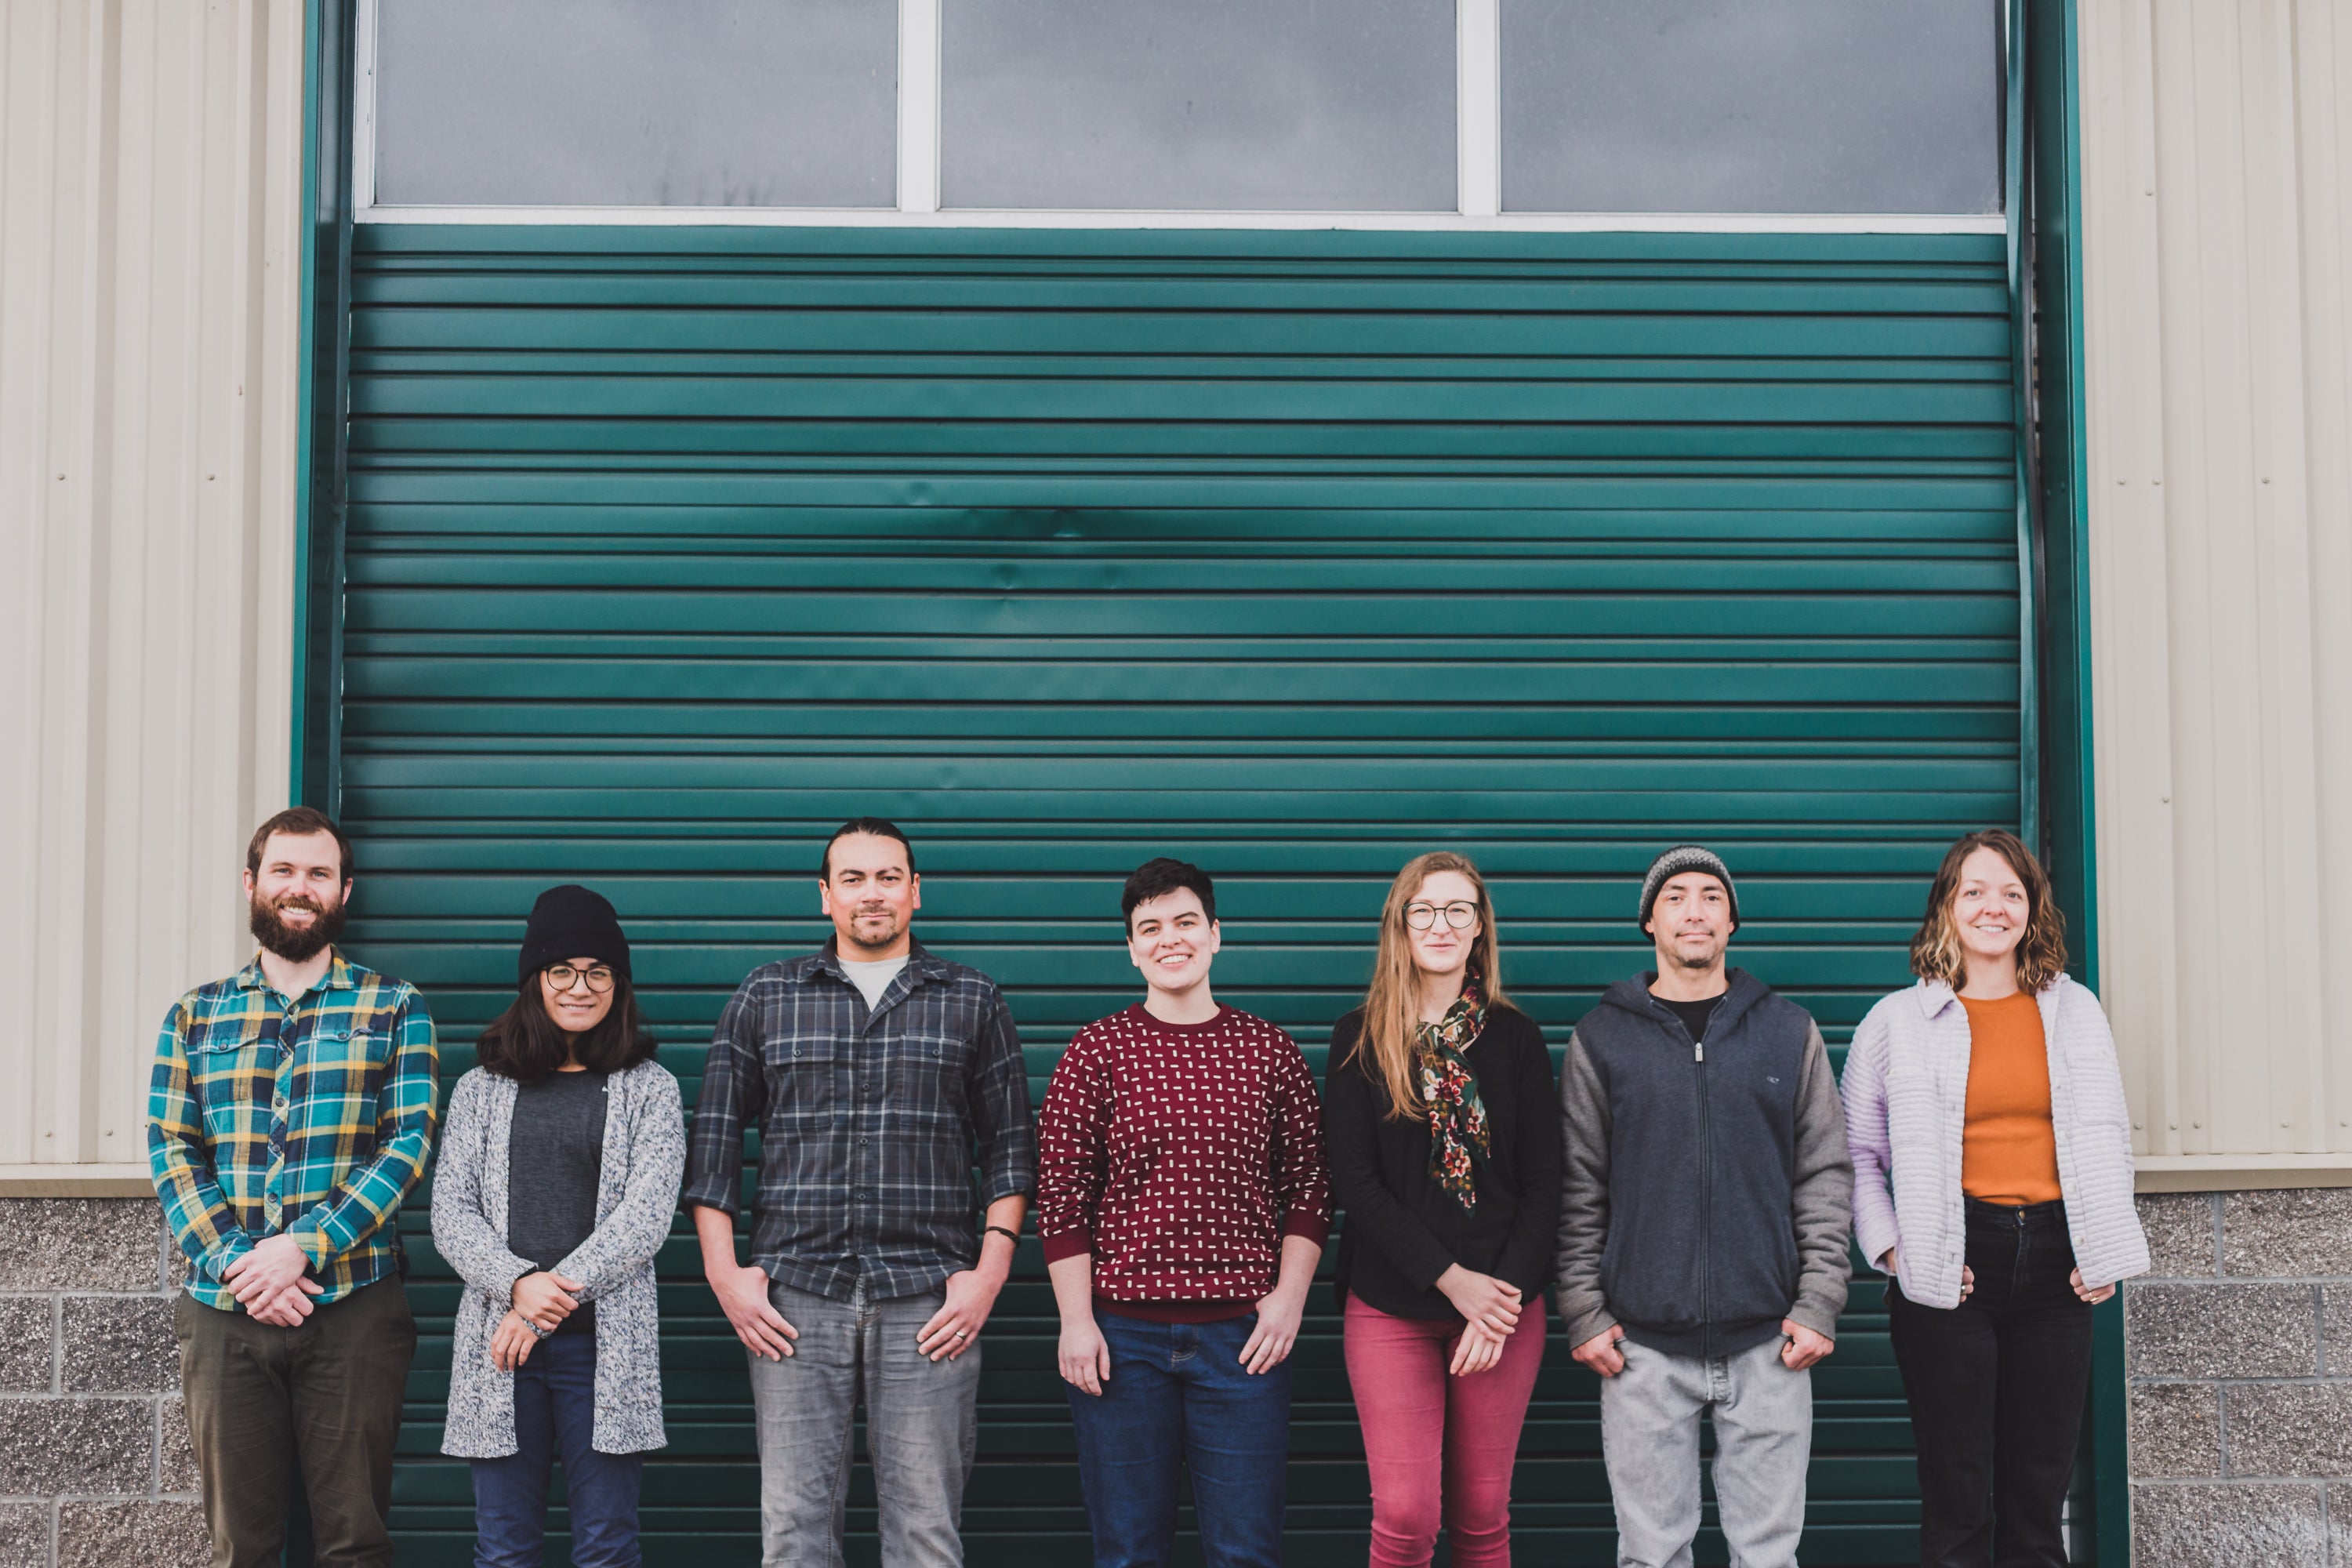 The 7 members of the spring 2023 Agricultural Connections Cooperative team stand in a line, facing the camera, in front of a green warehouse garage door. They wear a variety of sweaters and flannel with jeans and have their hands clasped or in their pockets. Left to right: Jake, Marisa, Miguel, Erin, Leslie, Josh, and Alex